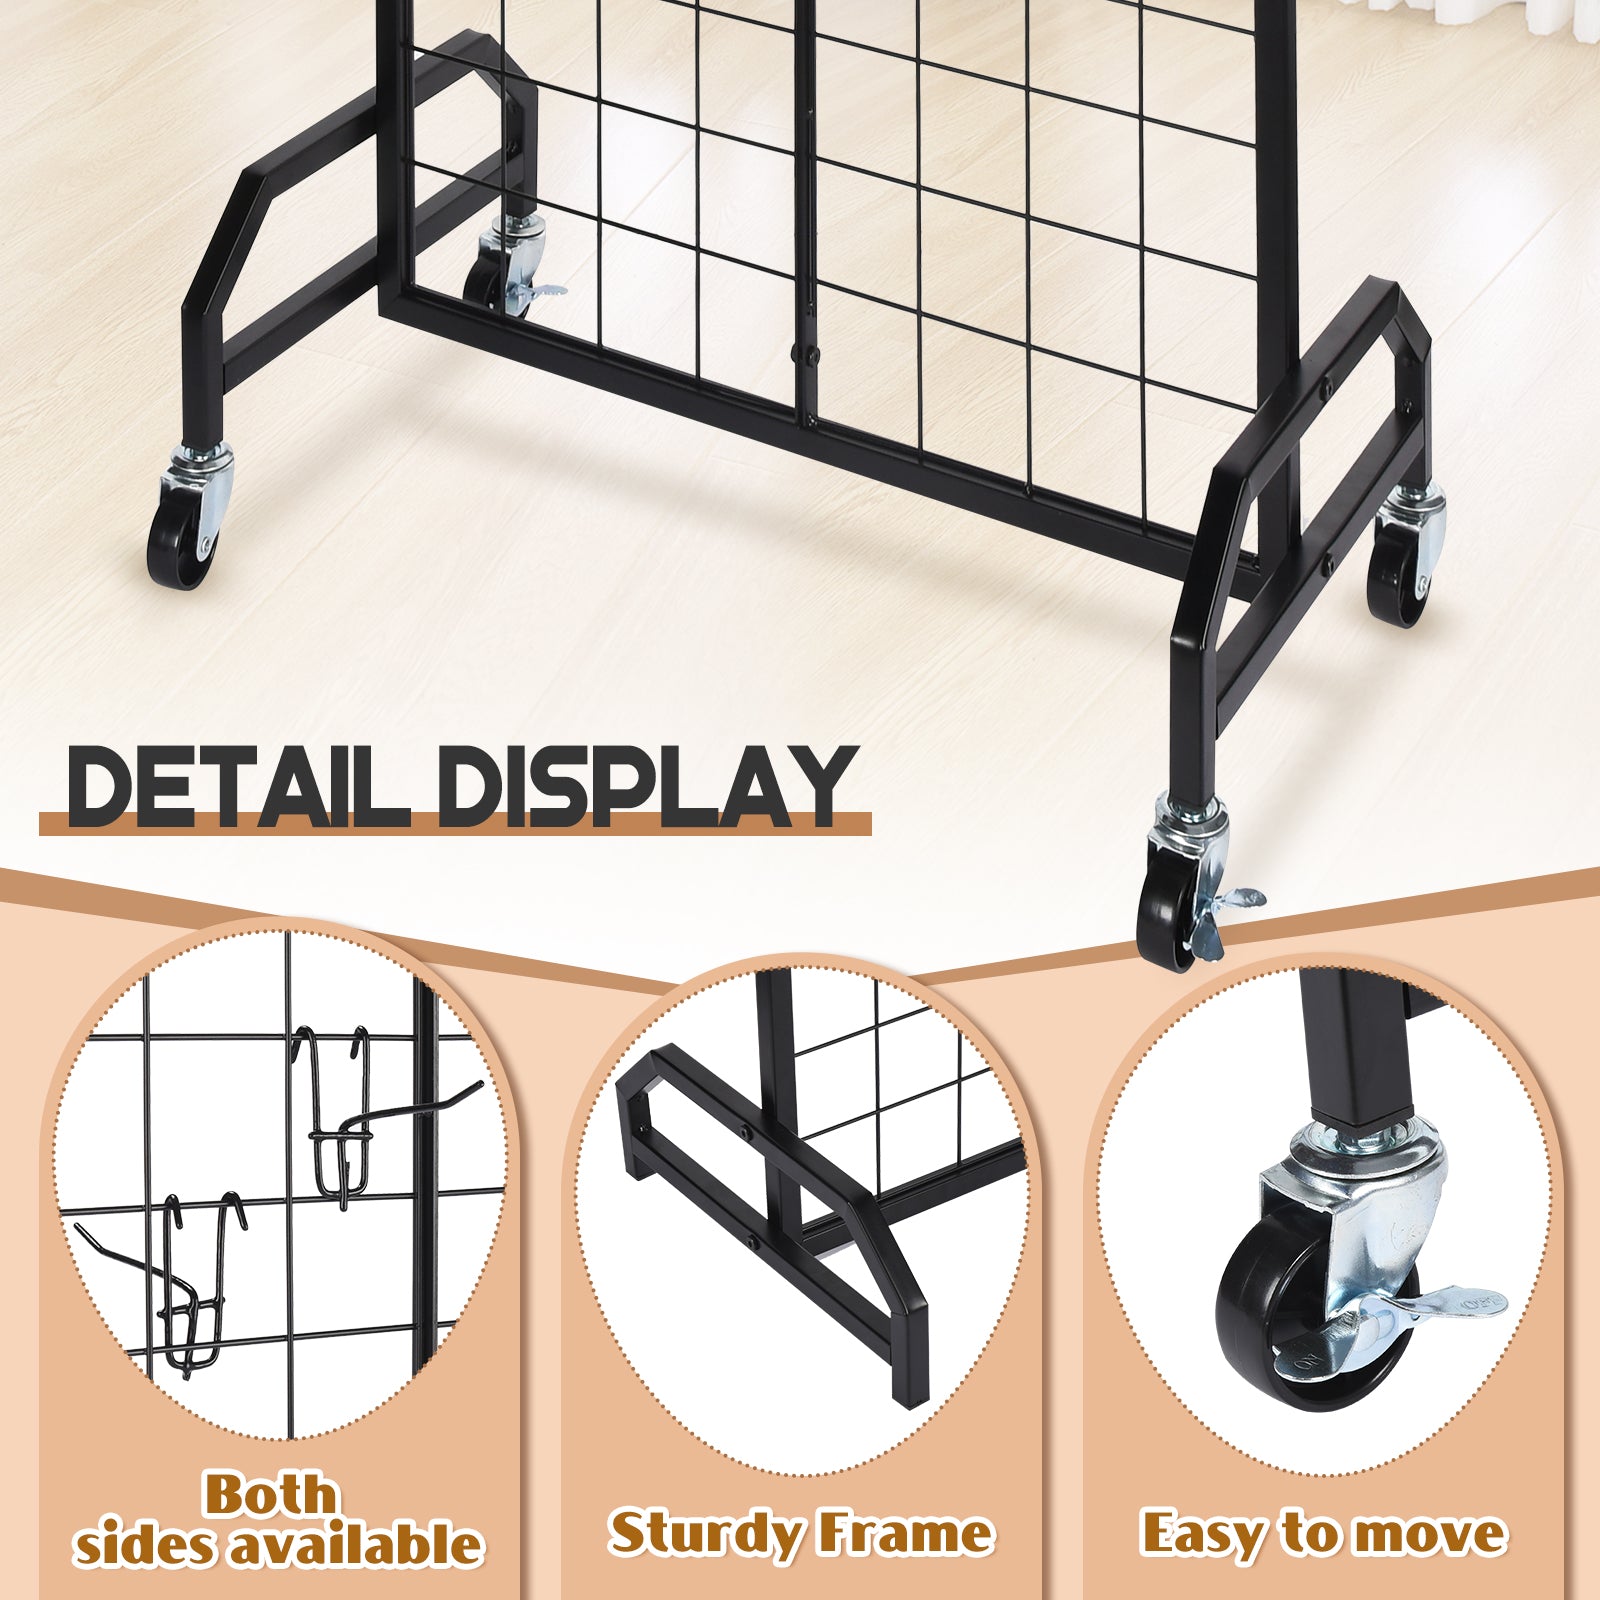 GADFISH Gridwall Panel Display Stand, Heavy-duty Movable Wire Gridwall Display Racks, Floorstanding Double Side Display Stand for Home Organization, Retail, Trade Show, Arts Craft Fair (Black)